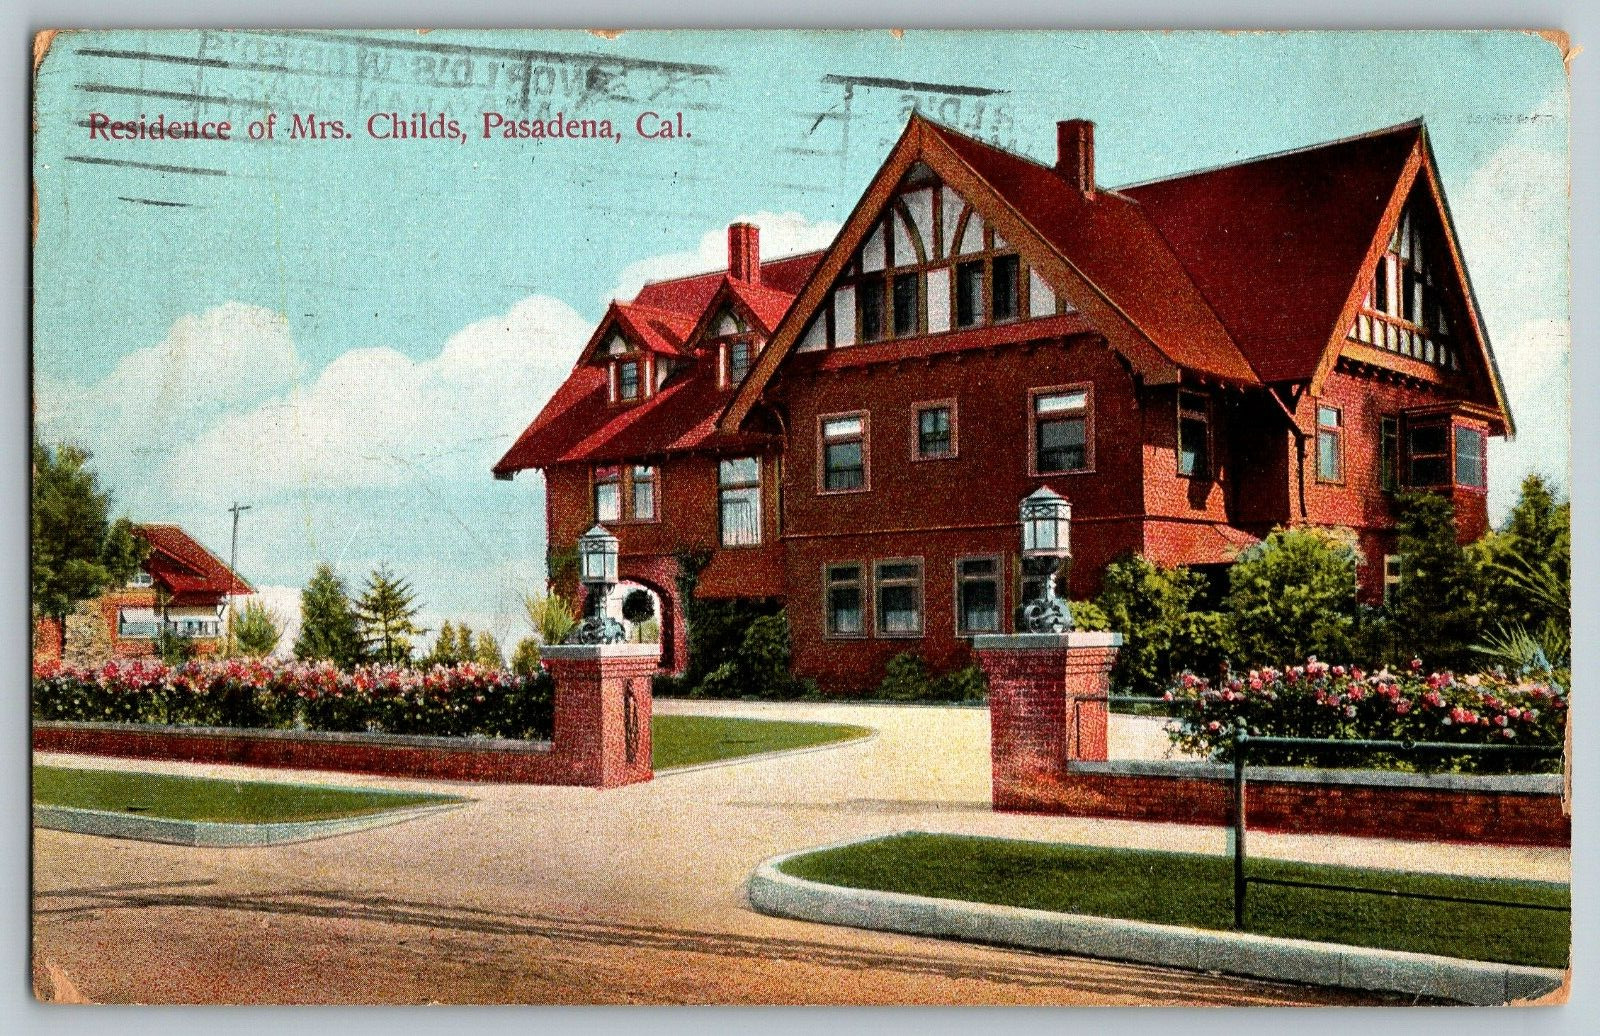 Pasadena, California - Residence of Mrs. Childs - Vintage Postcard - Posted